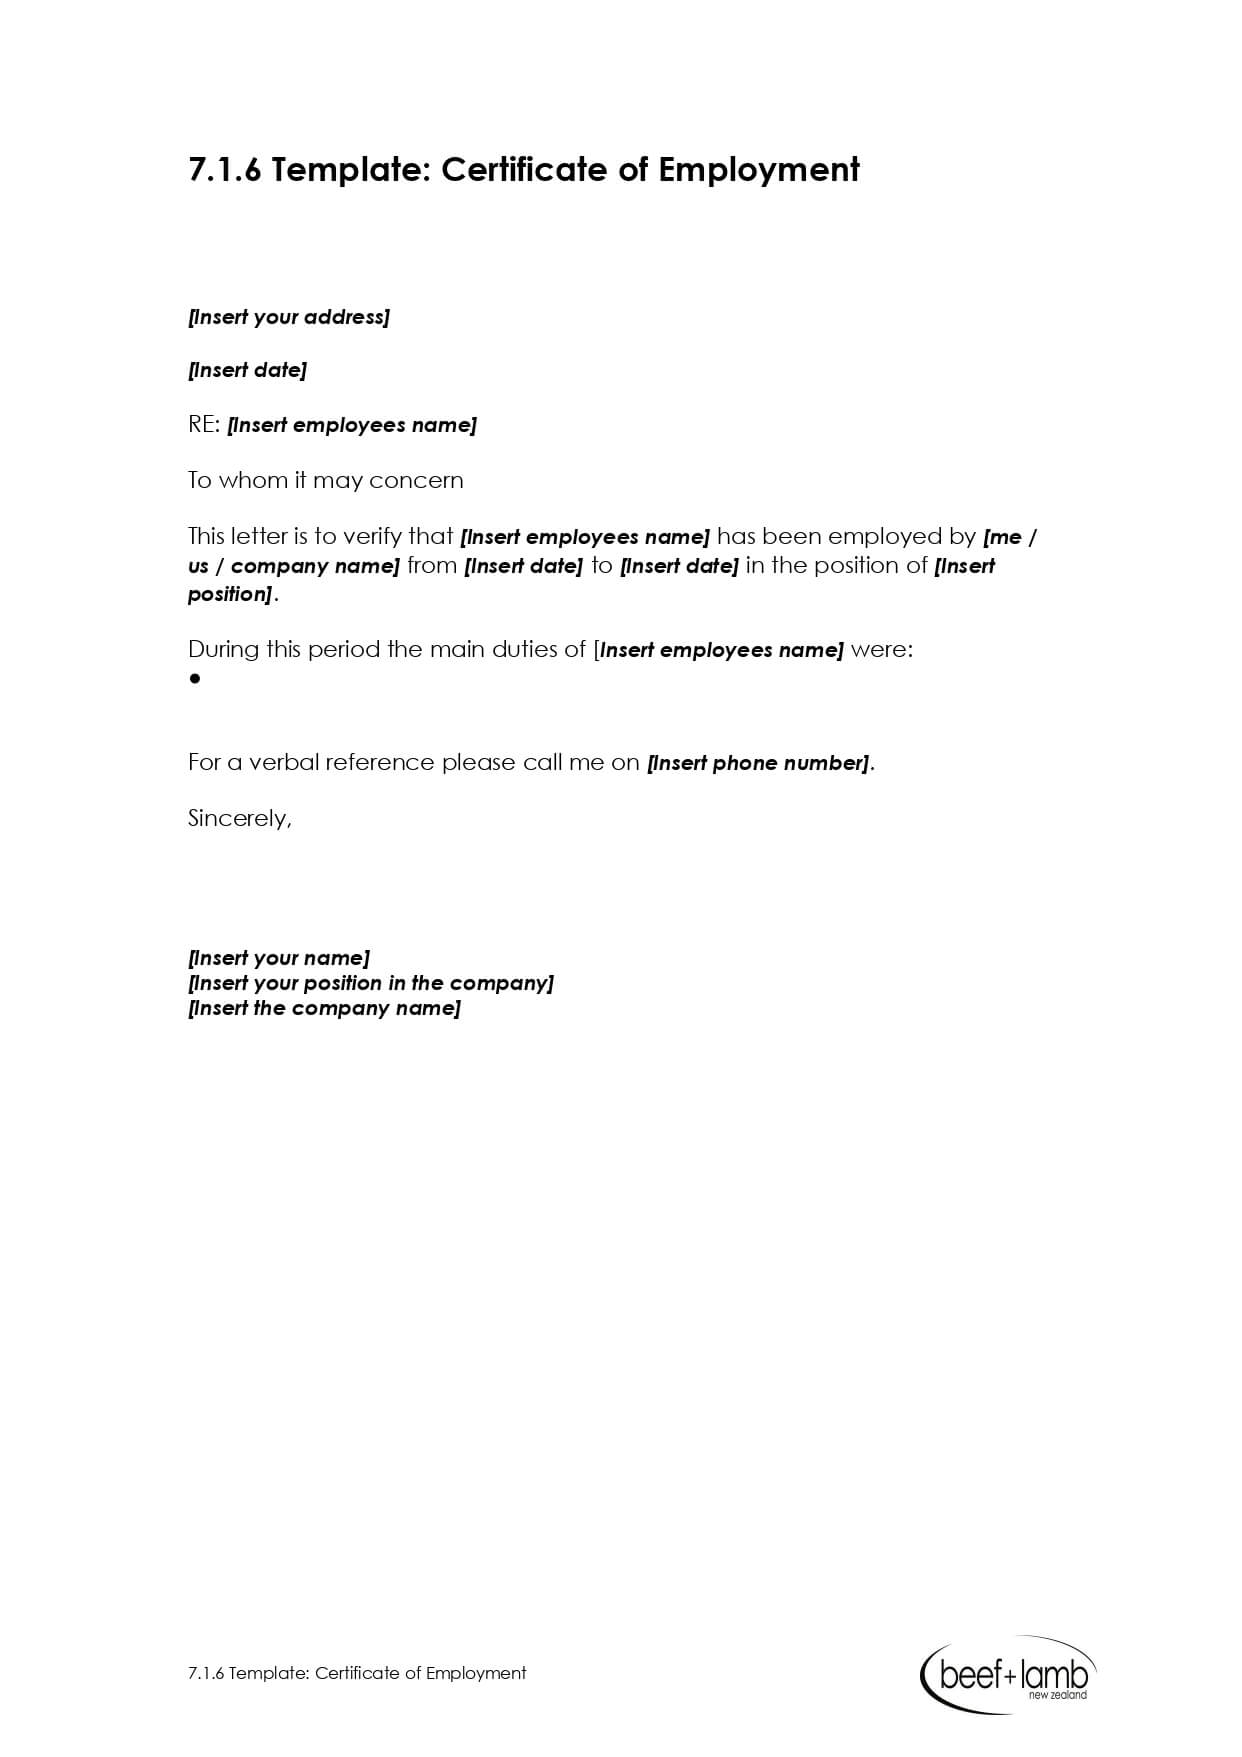 Editable Certificate Of Employment Template - Google Docs Throughout Employee Certificate Of Service Template